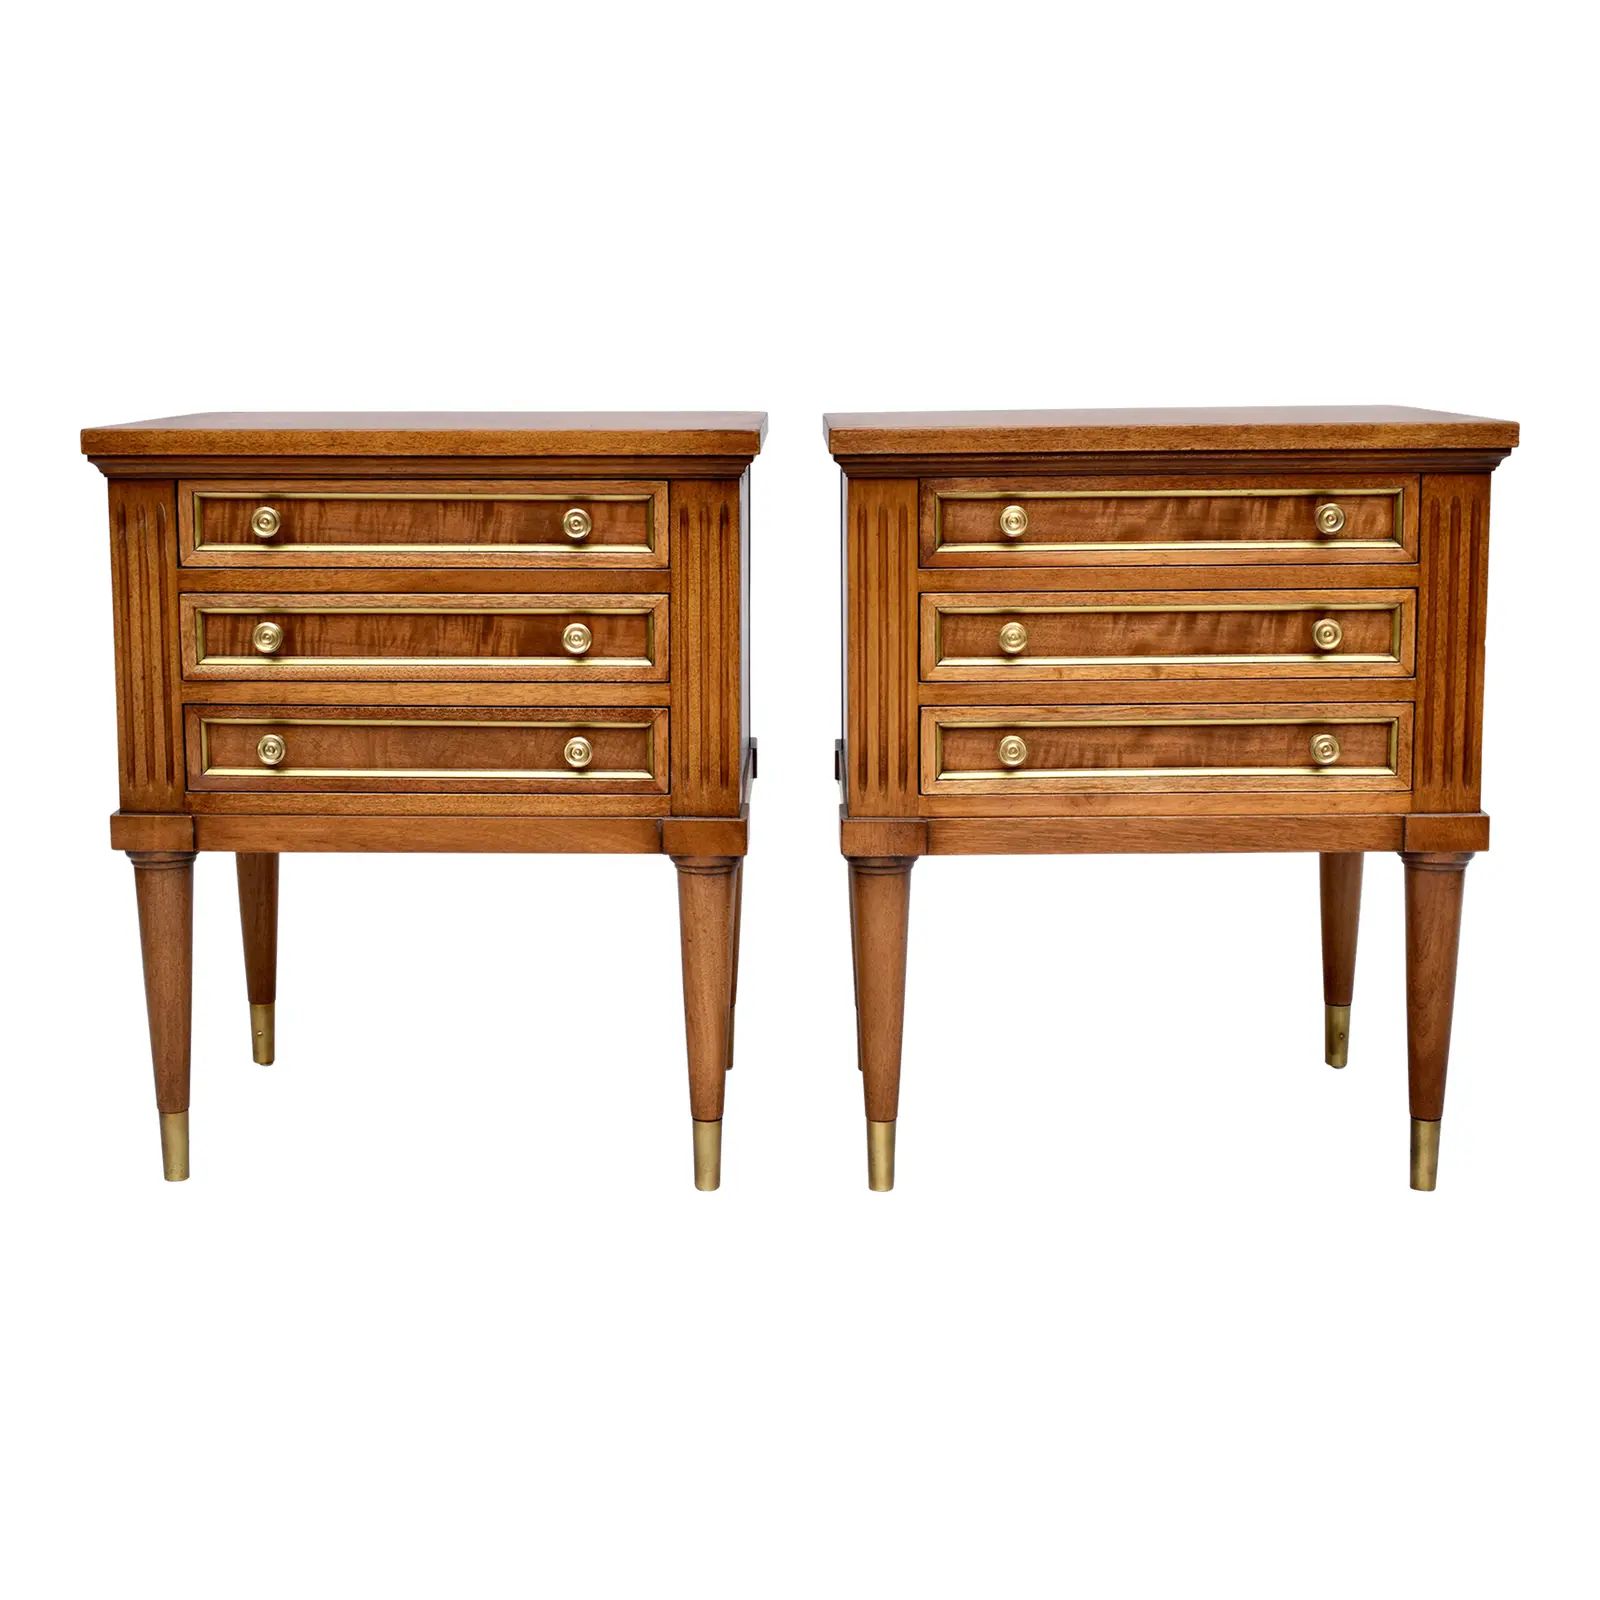 Pair of Petite French Directoire Style Commodes or Nightstands | Chairish